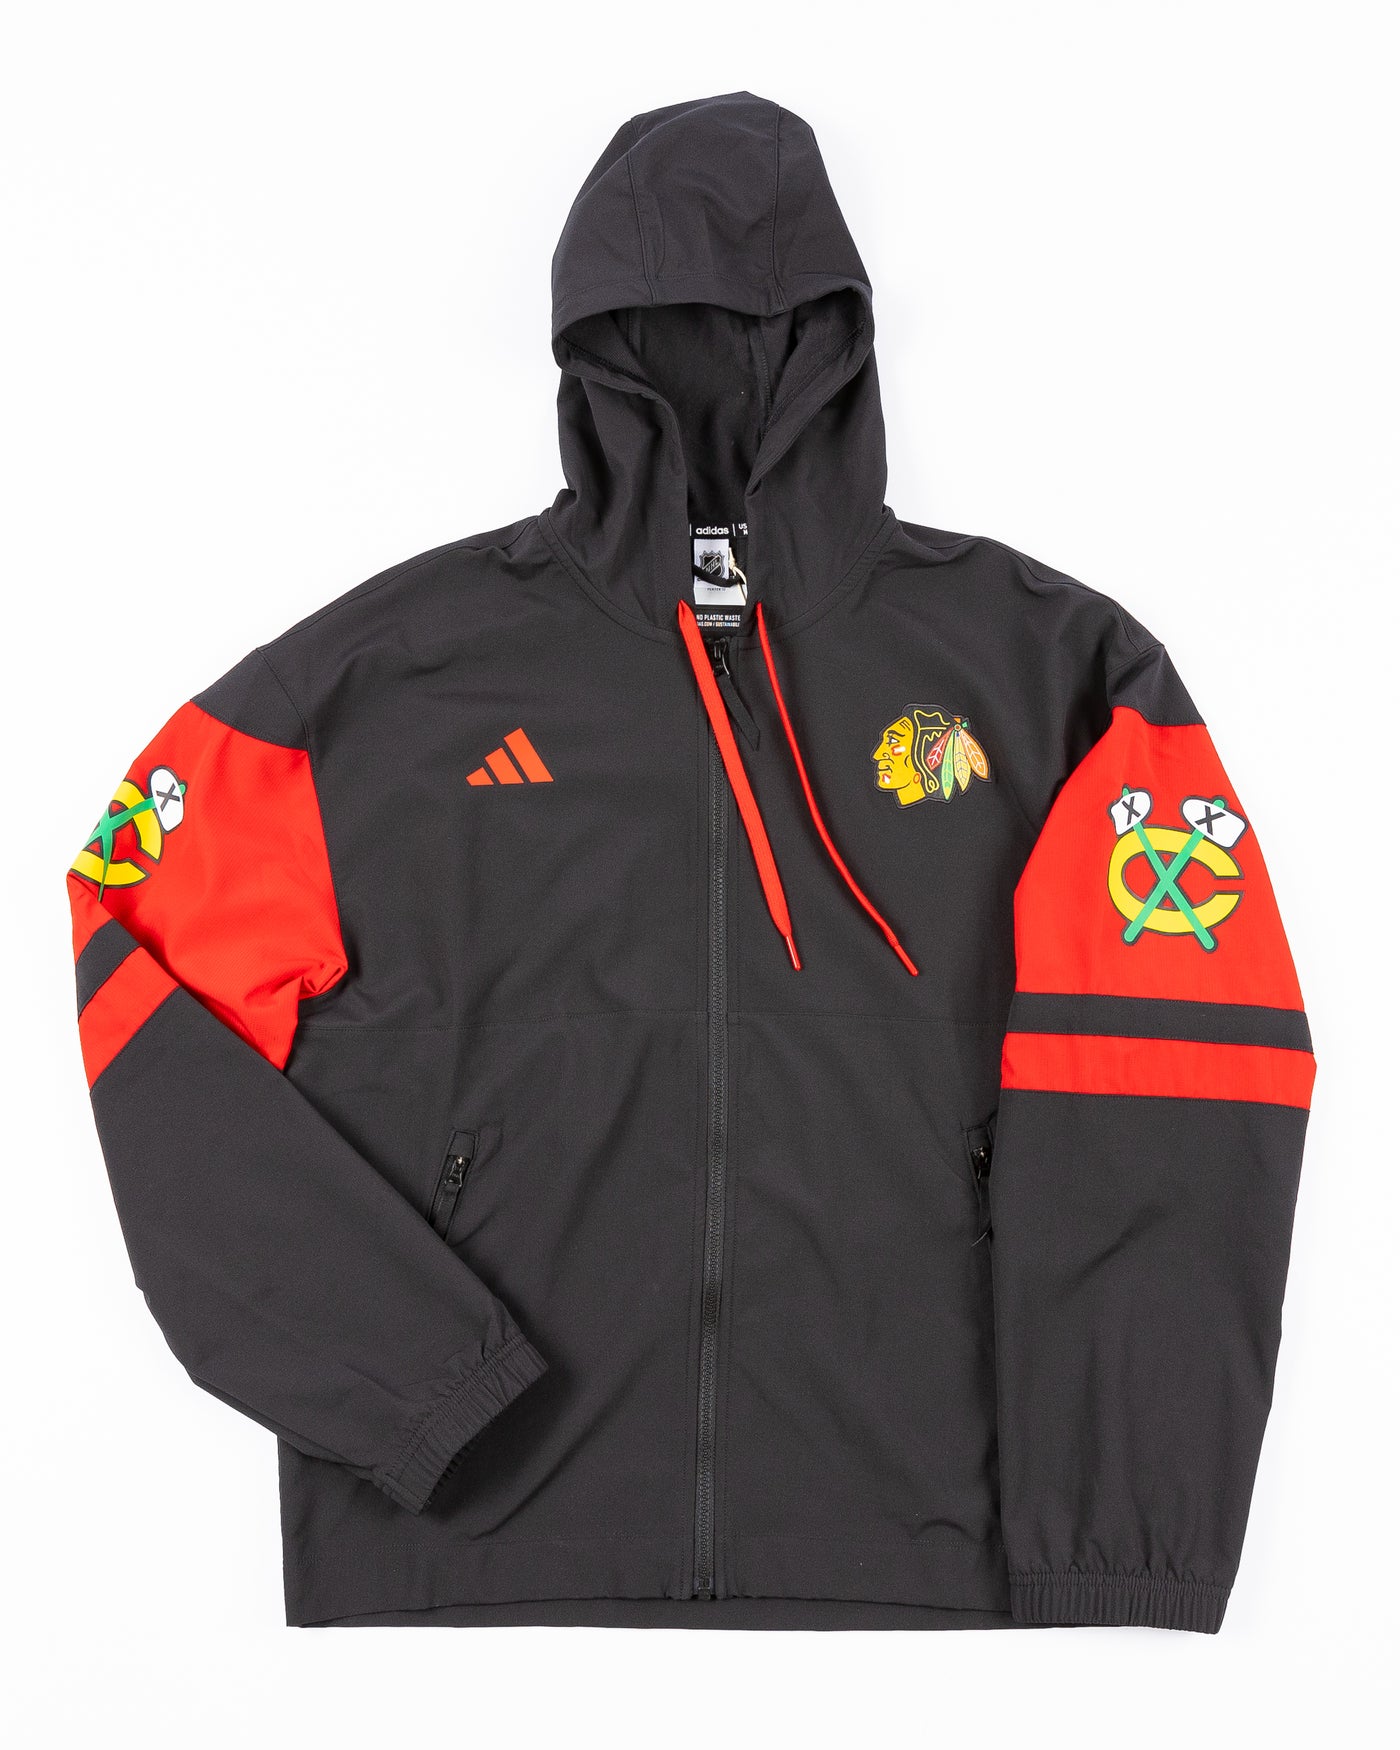 black and red adidas full zip hooded jacket with Chicago Blackhawks primary logo on left chest and secondary logo on both shoulders - front lay flat